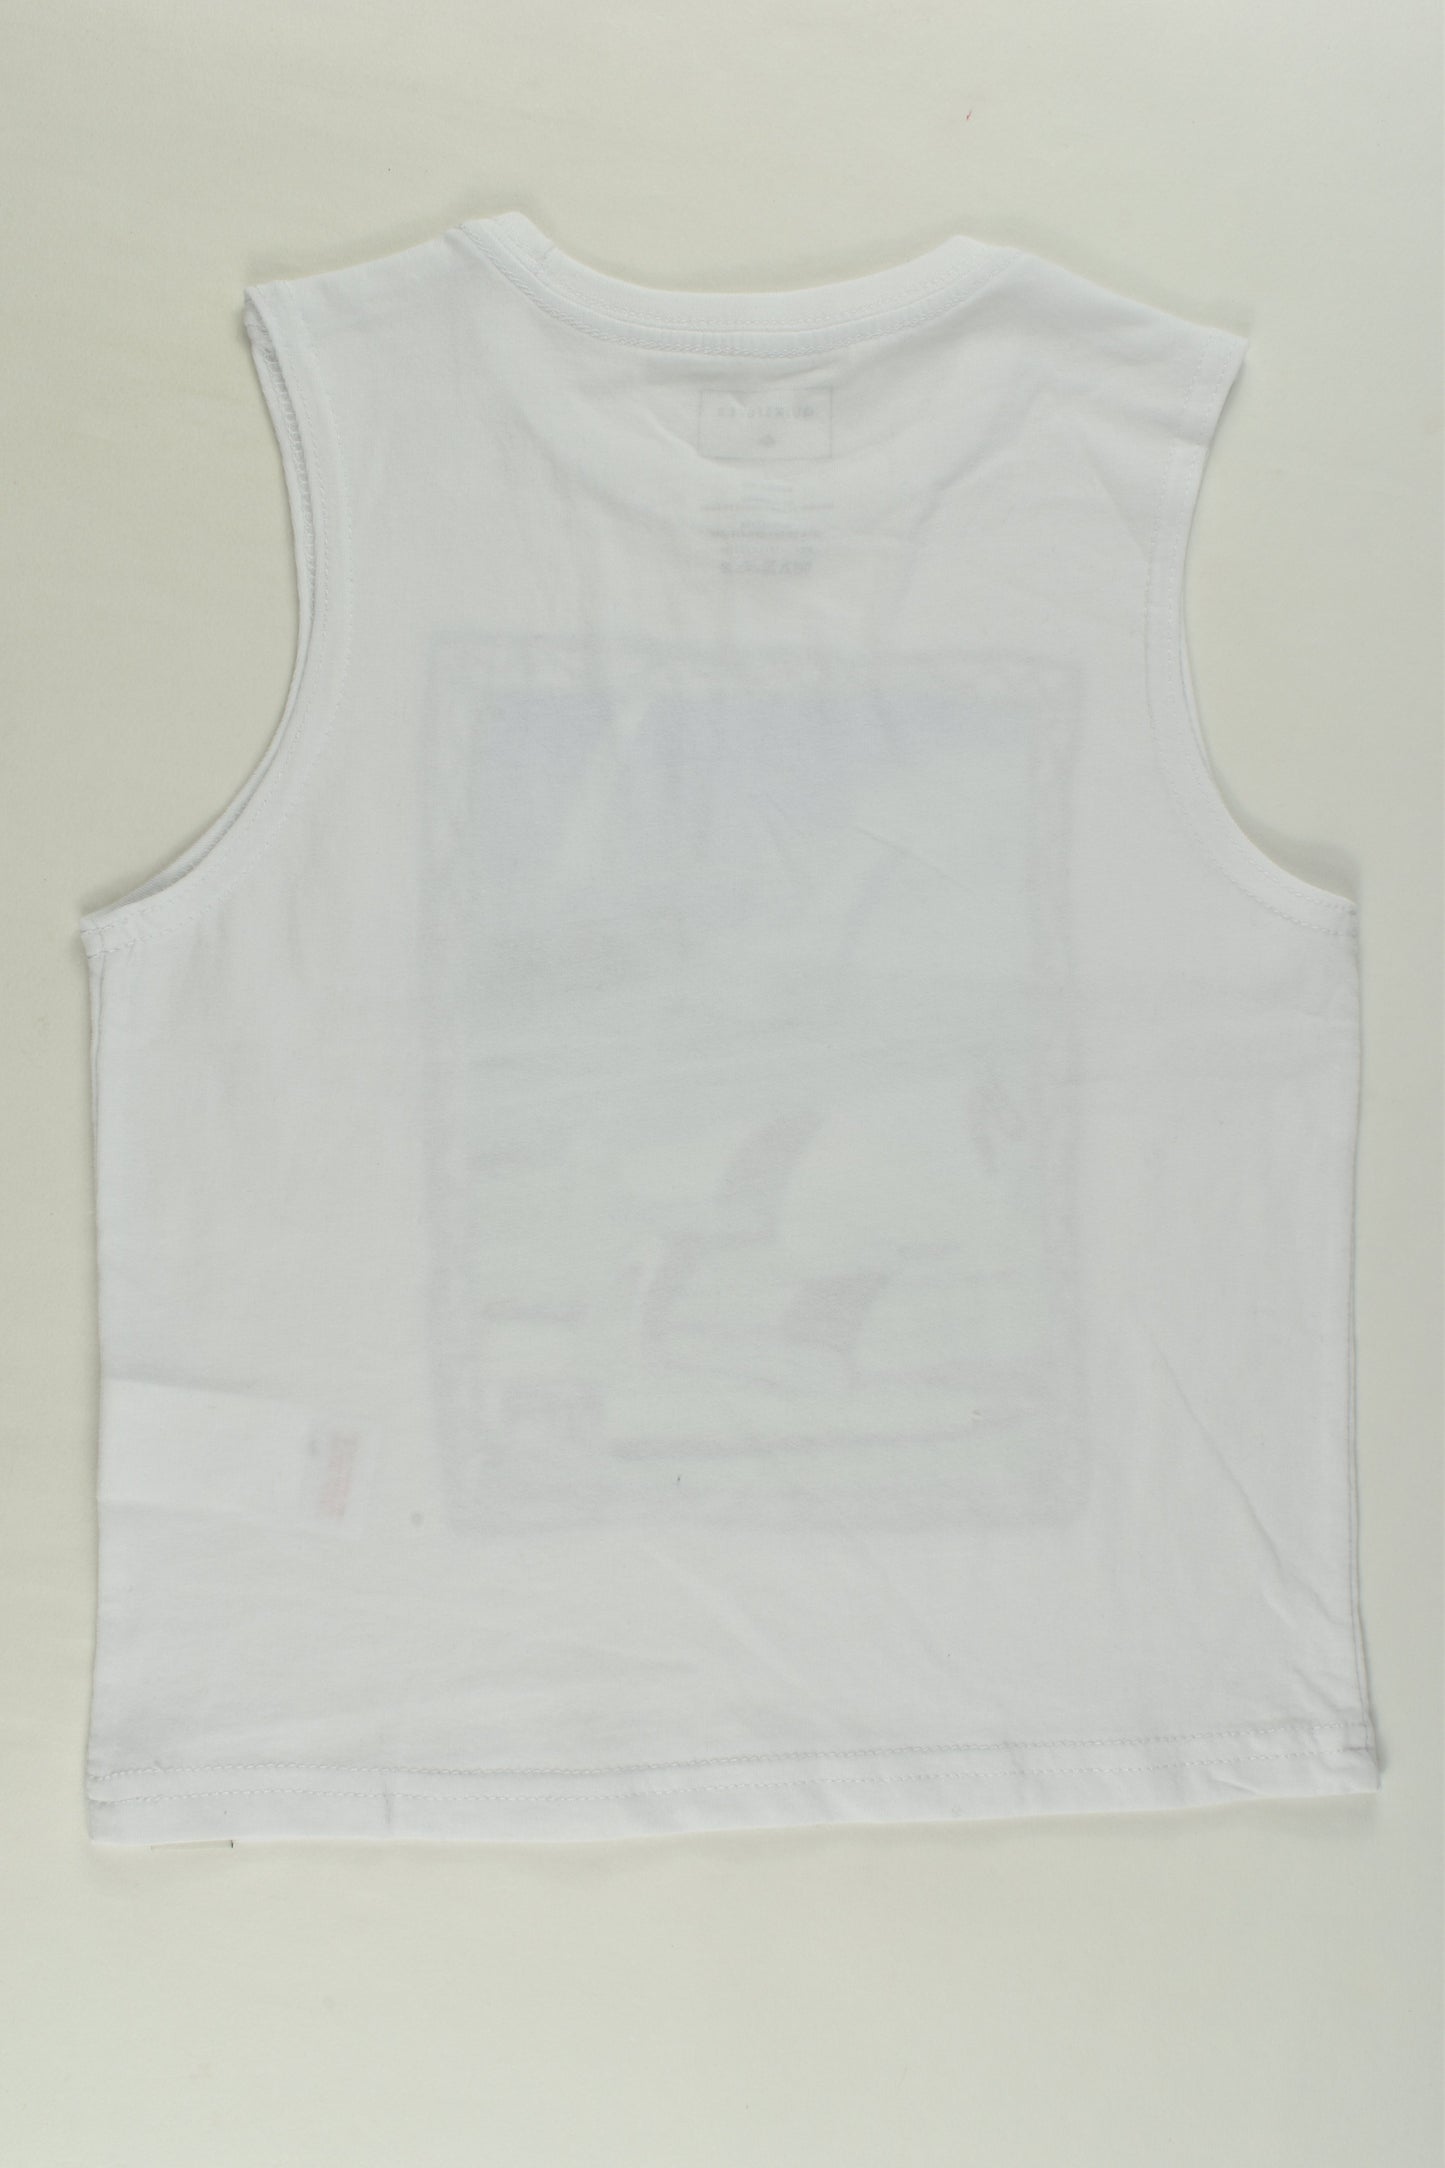 NEW Quiksilver Size 2 Tank Top